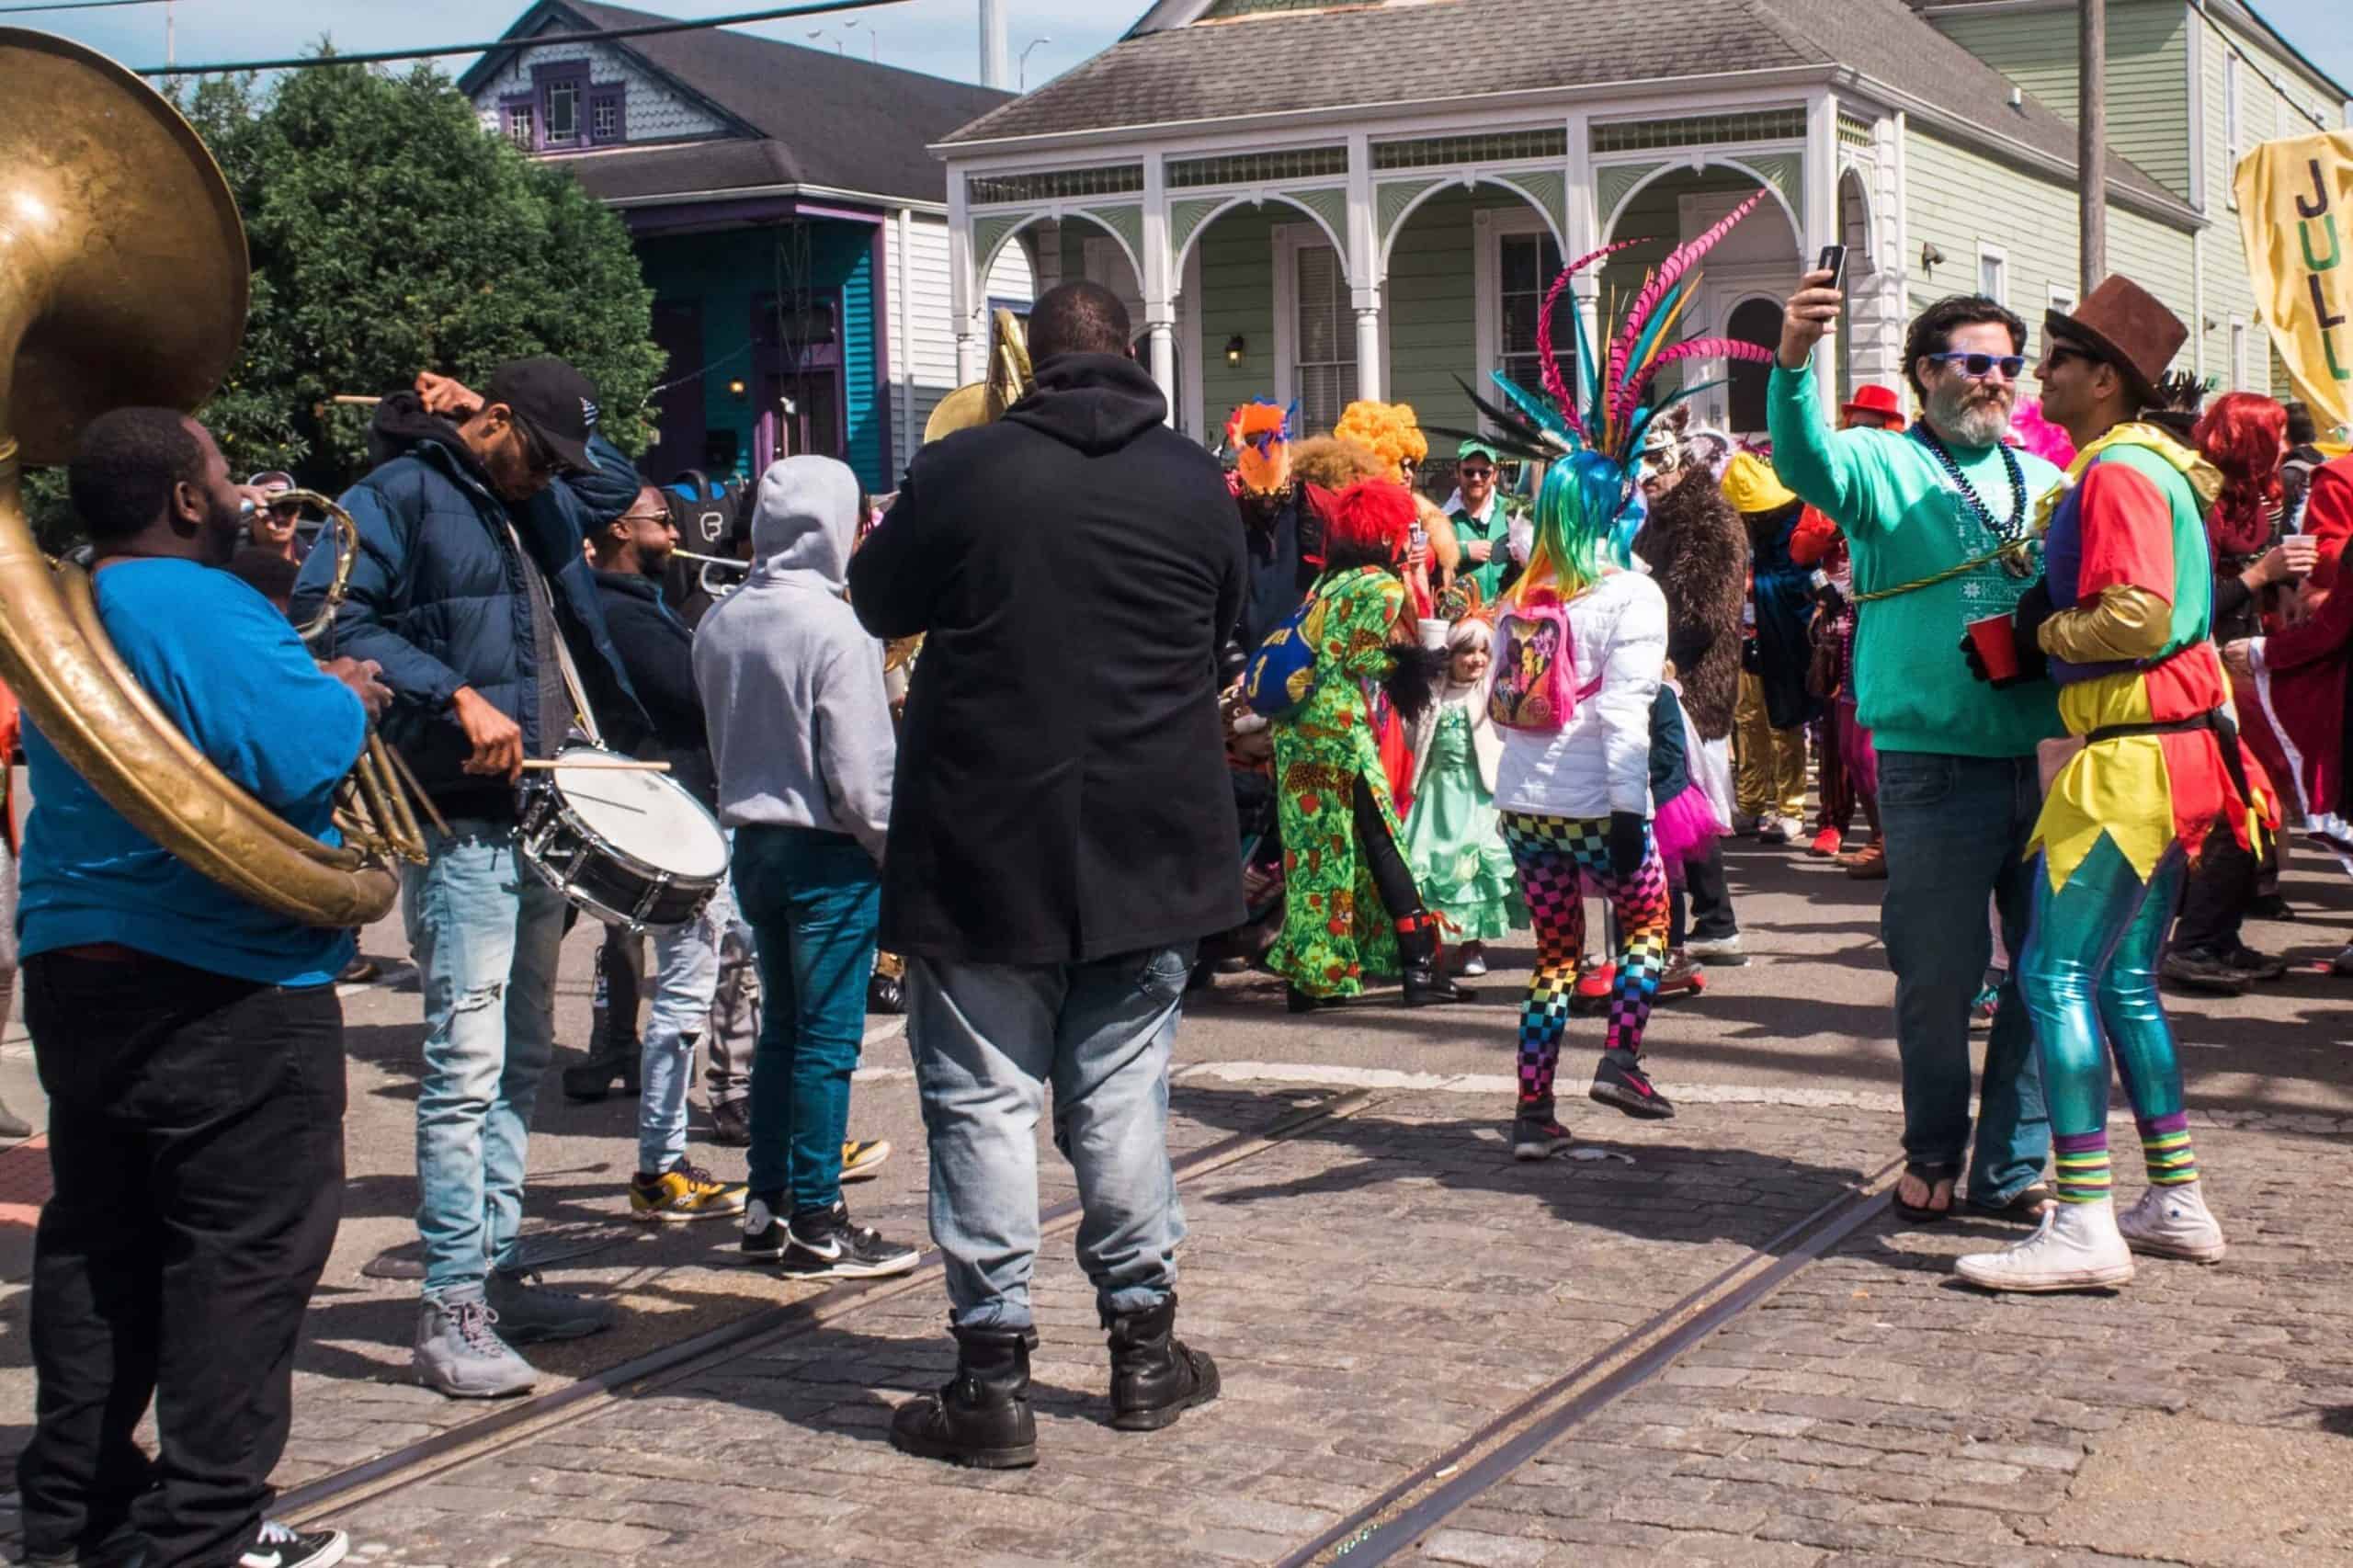 Walking parade | What to Expect at Mardi Gras in New Orleans